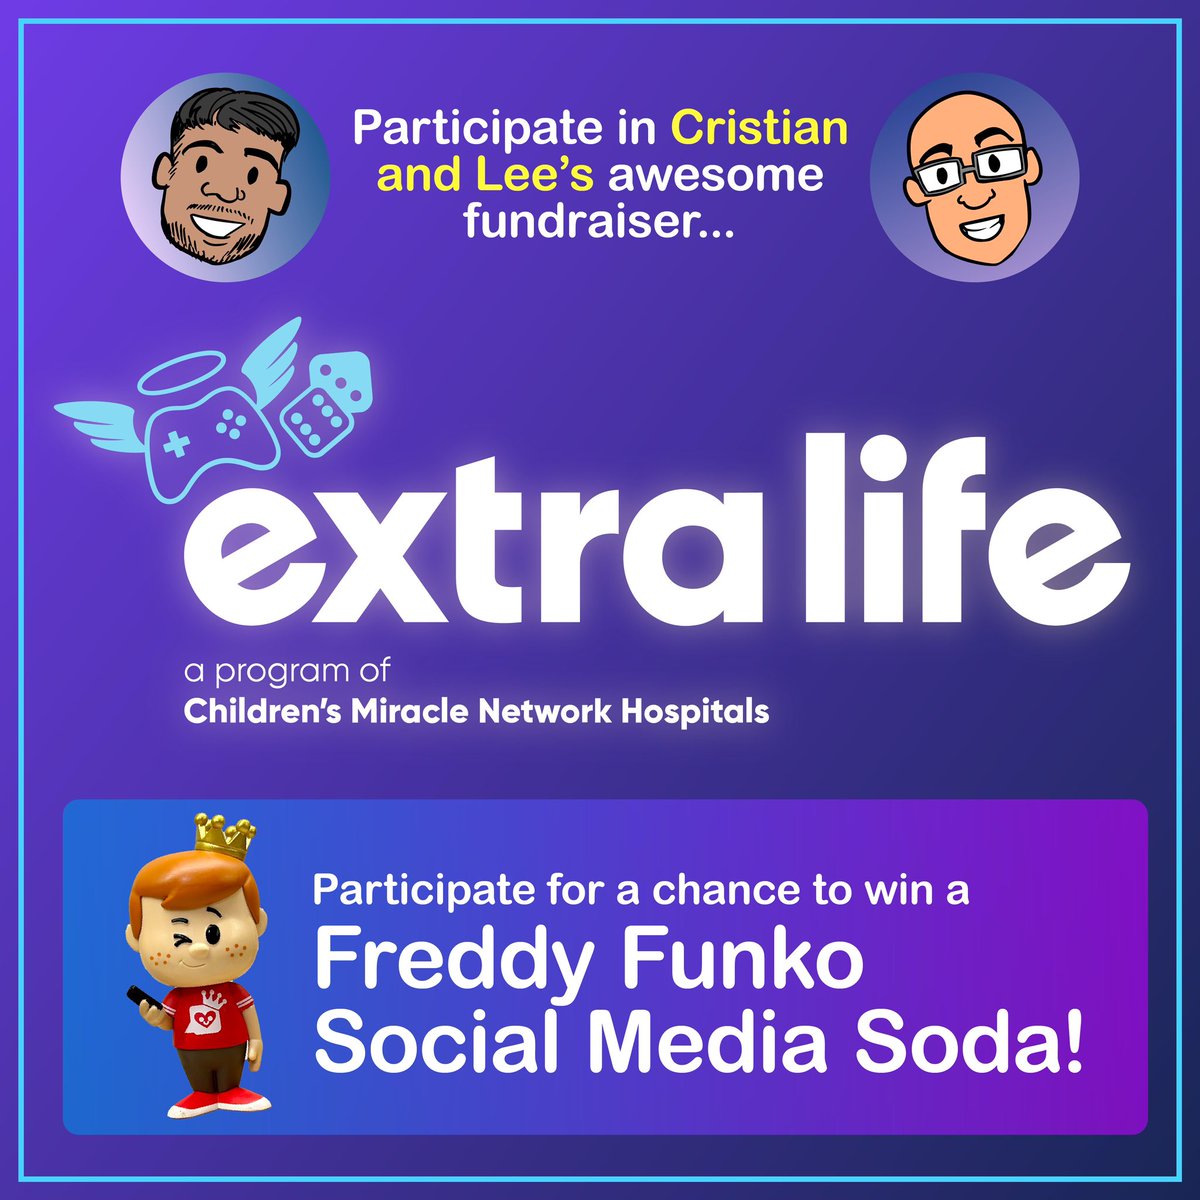 Hello Funatics!!! Hope you’re all having a great day! As you know me and @FunkoLeeM love to give back to our Funko community and this time we have a special opportunity for you to score at SMS! For the past 2 year I’ve raised funds for extra life for kids, and 2024 would mark the